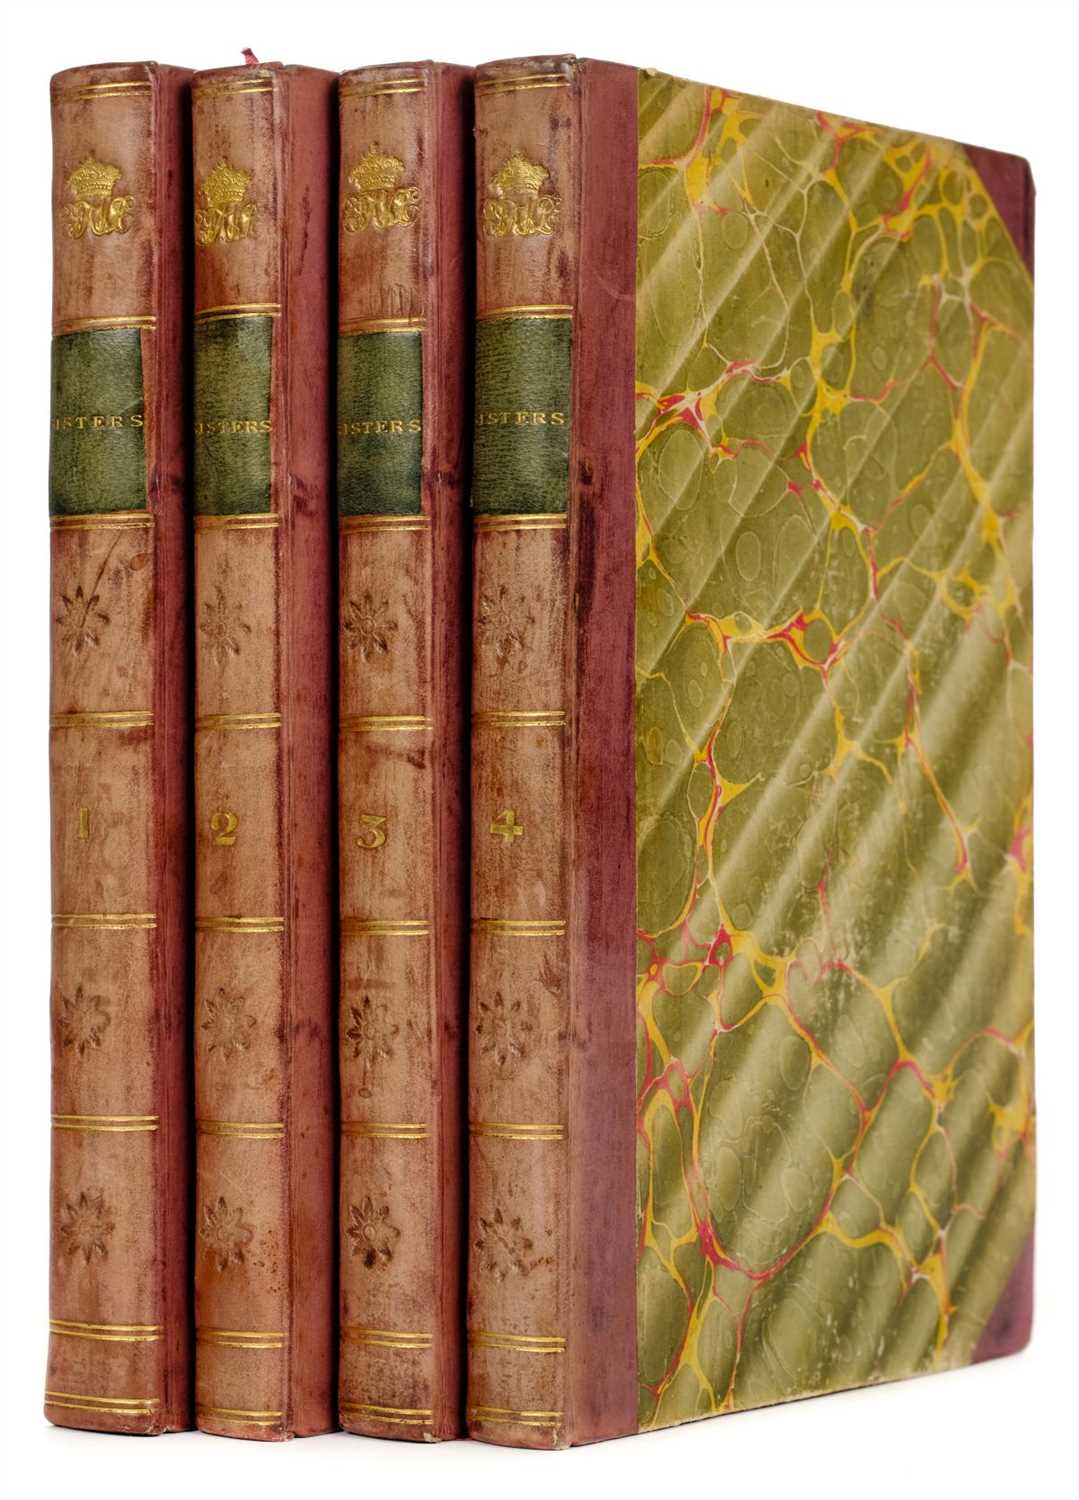 Lot 361 - Moore (Alicia). The Sisters: a Novel, 4 volumes, 1st edition, 1821